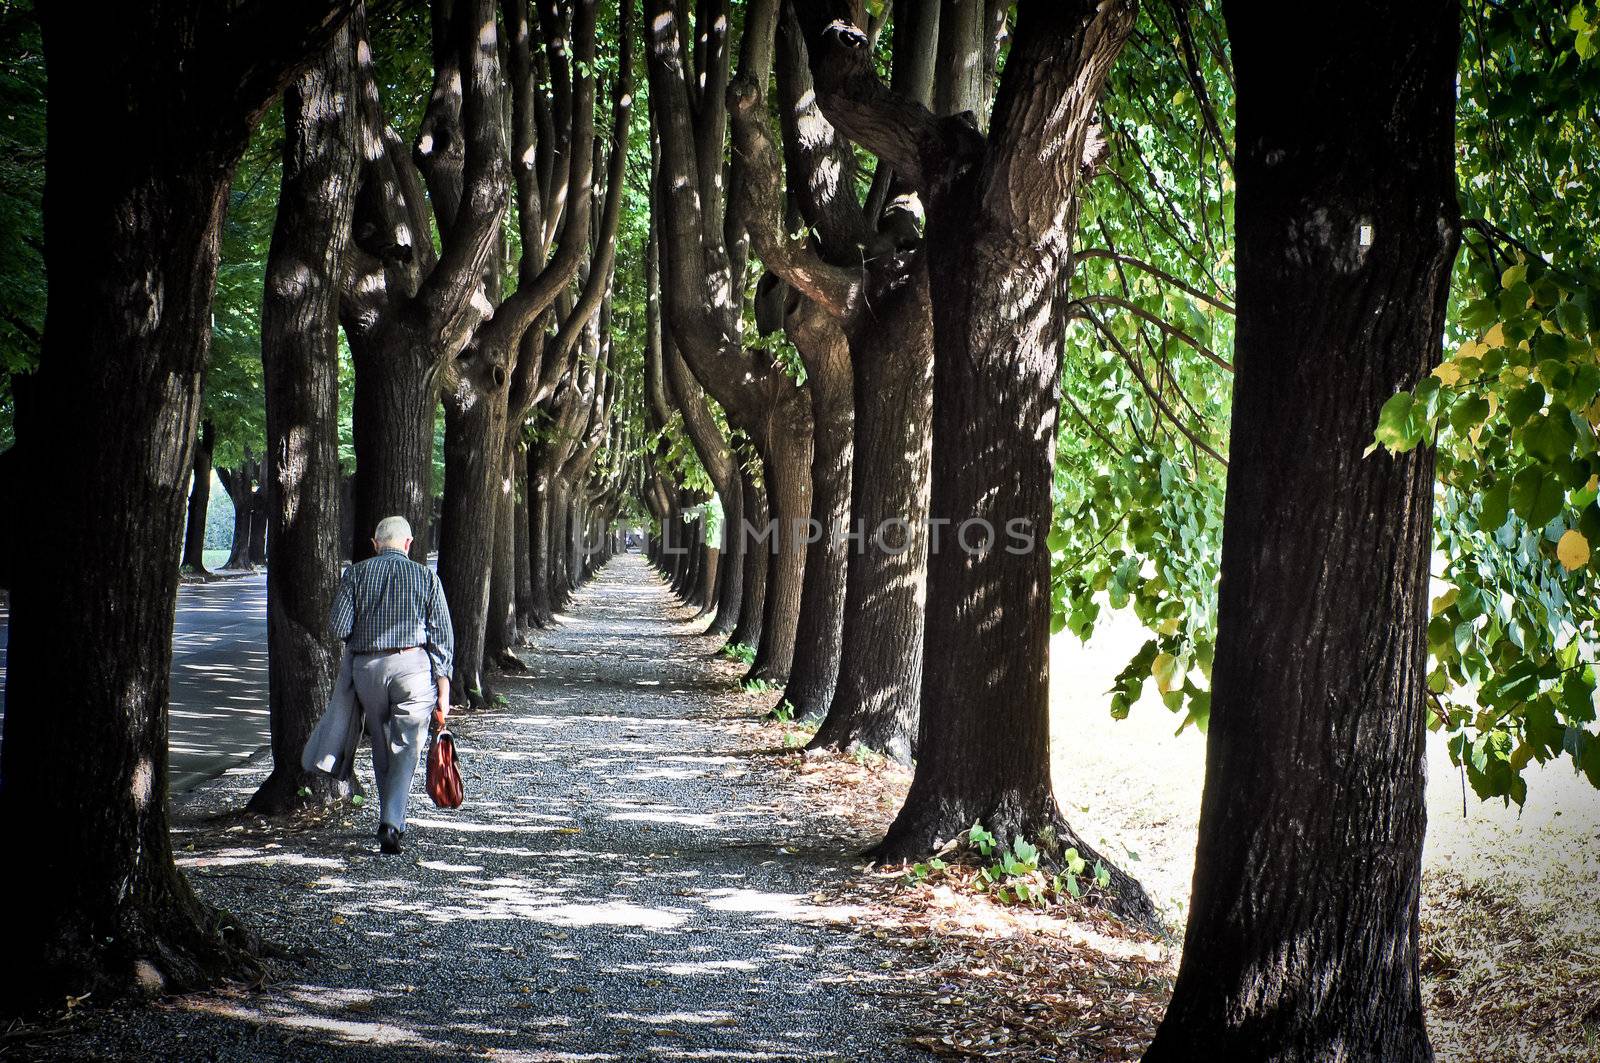 Old man walking in the path surrounded by trees by martinm303